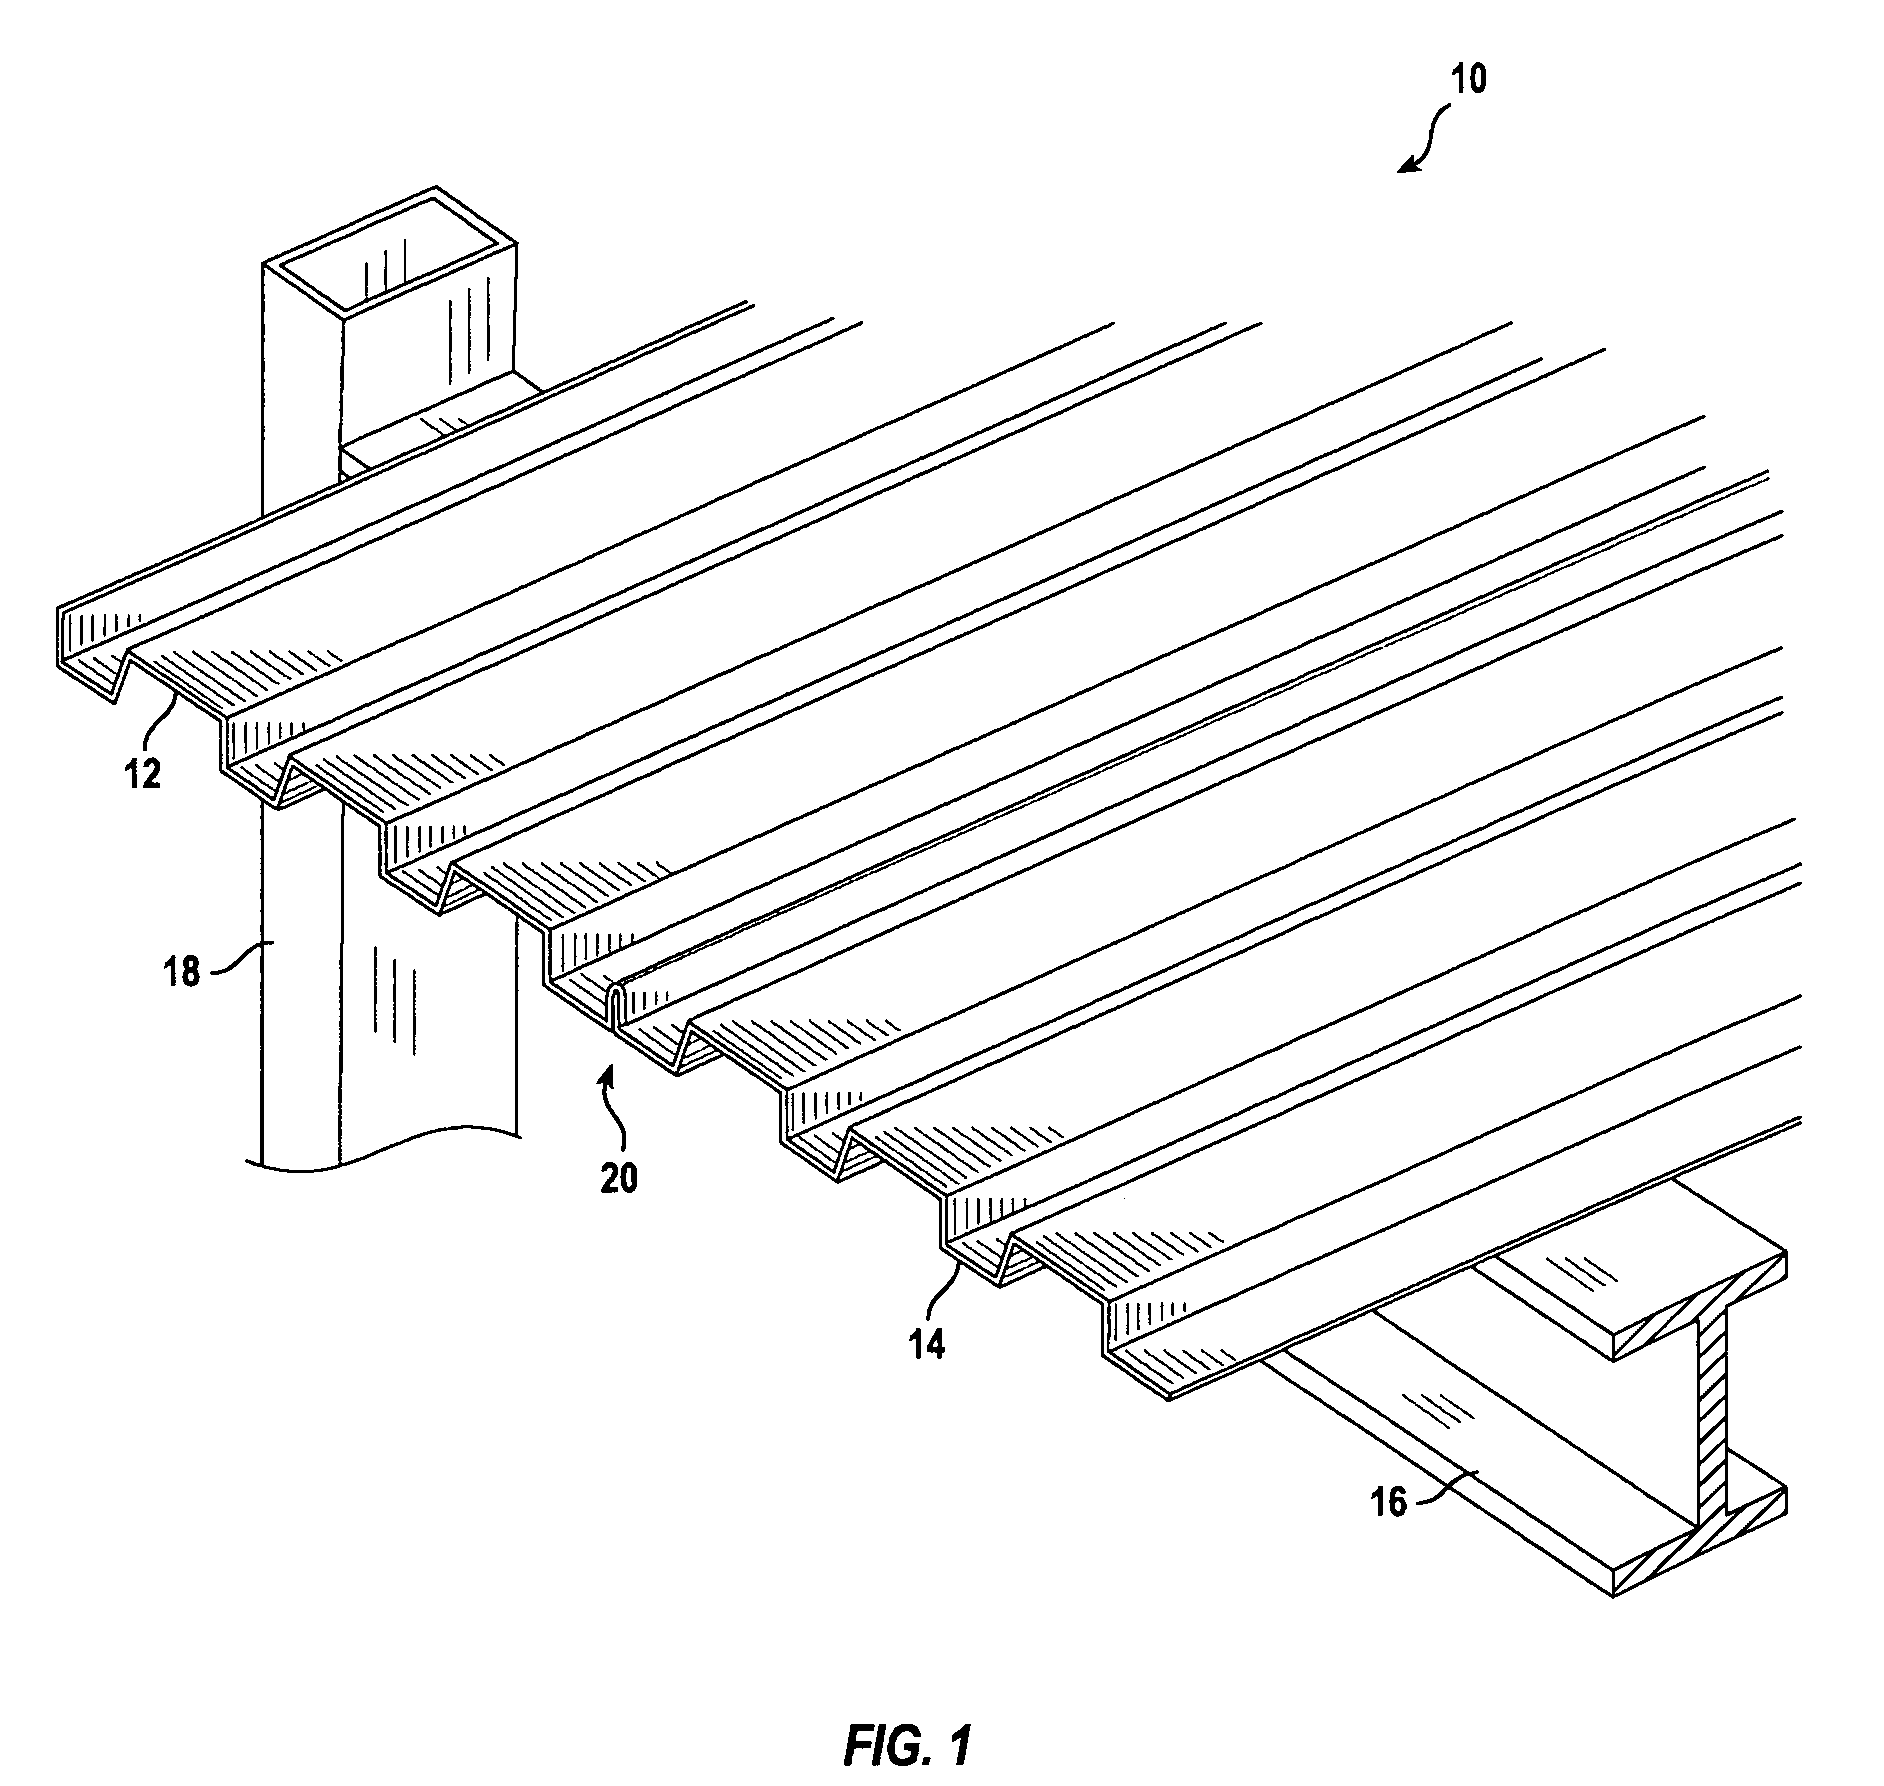 Tool and method for joining sidelapped joints of deck panels